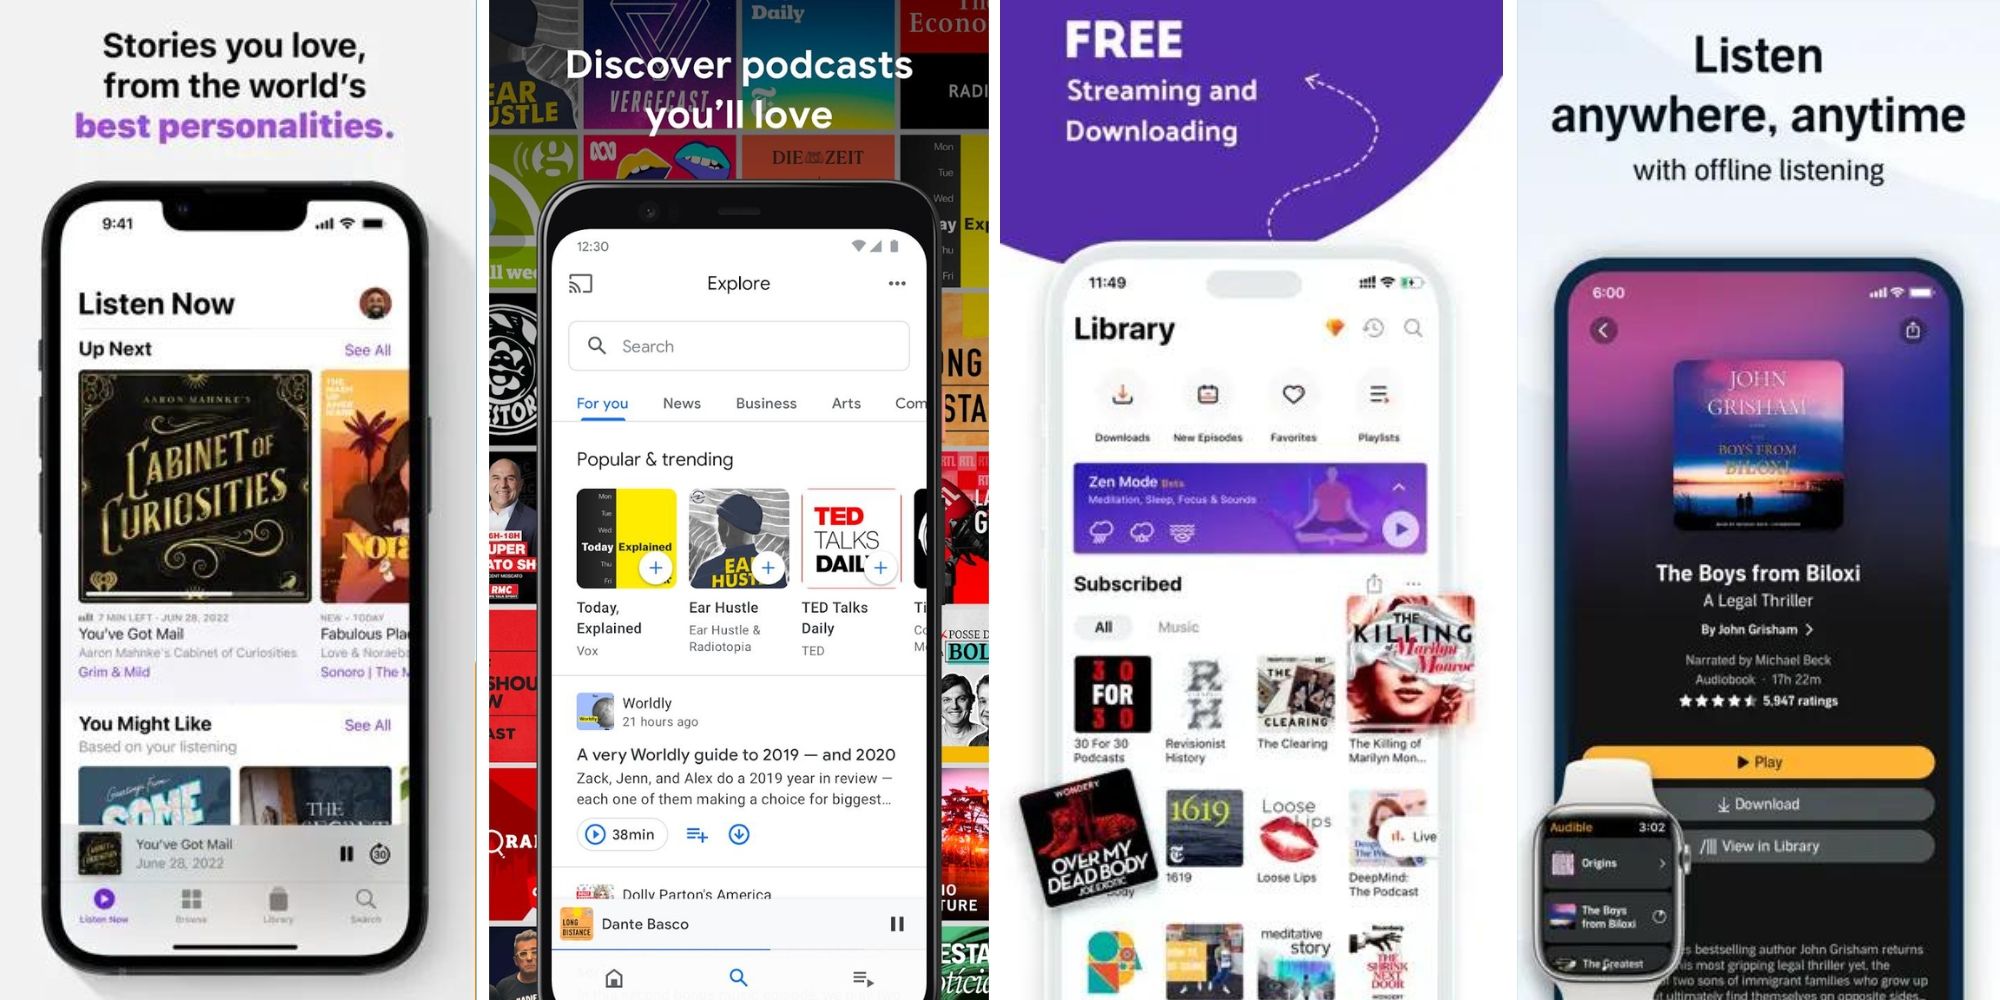 Screenshots of different podcast apps for Android and iPhone